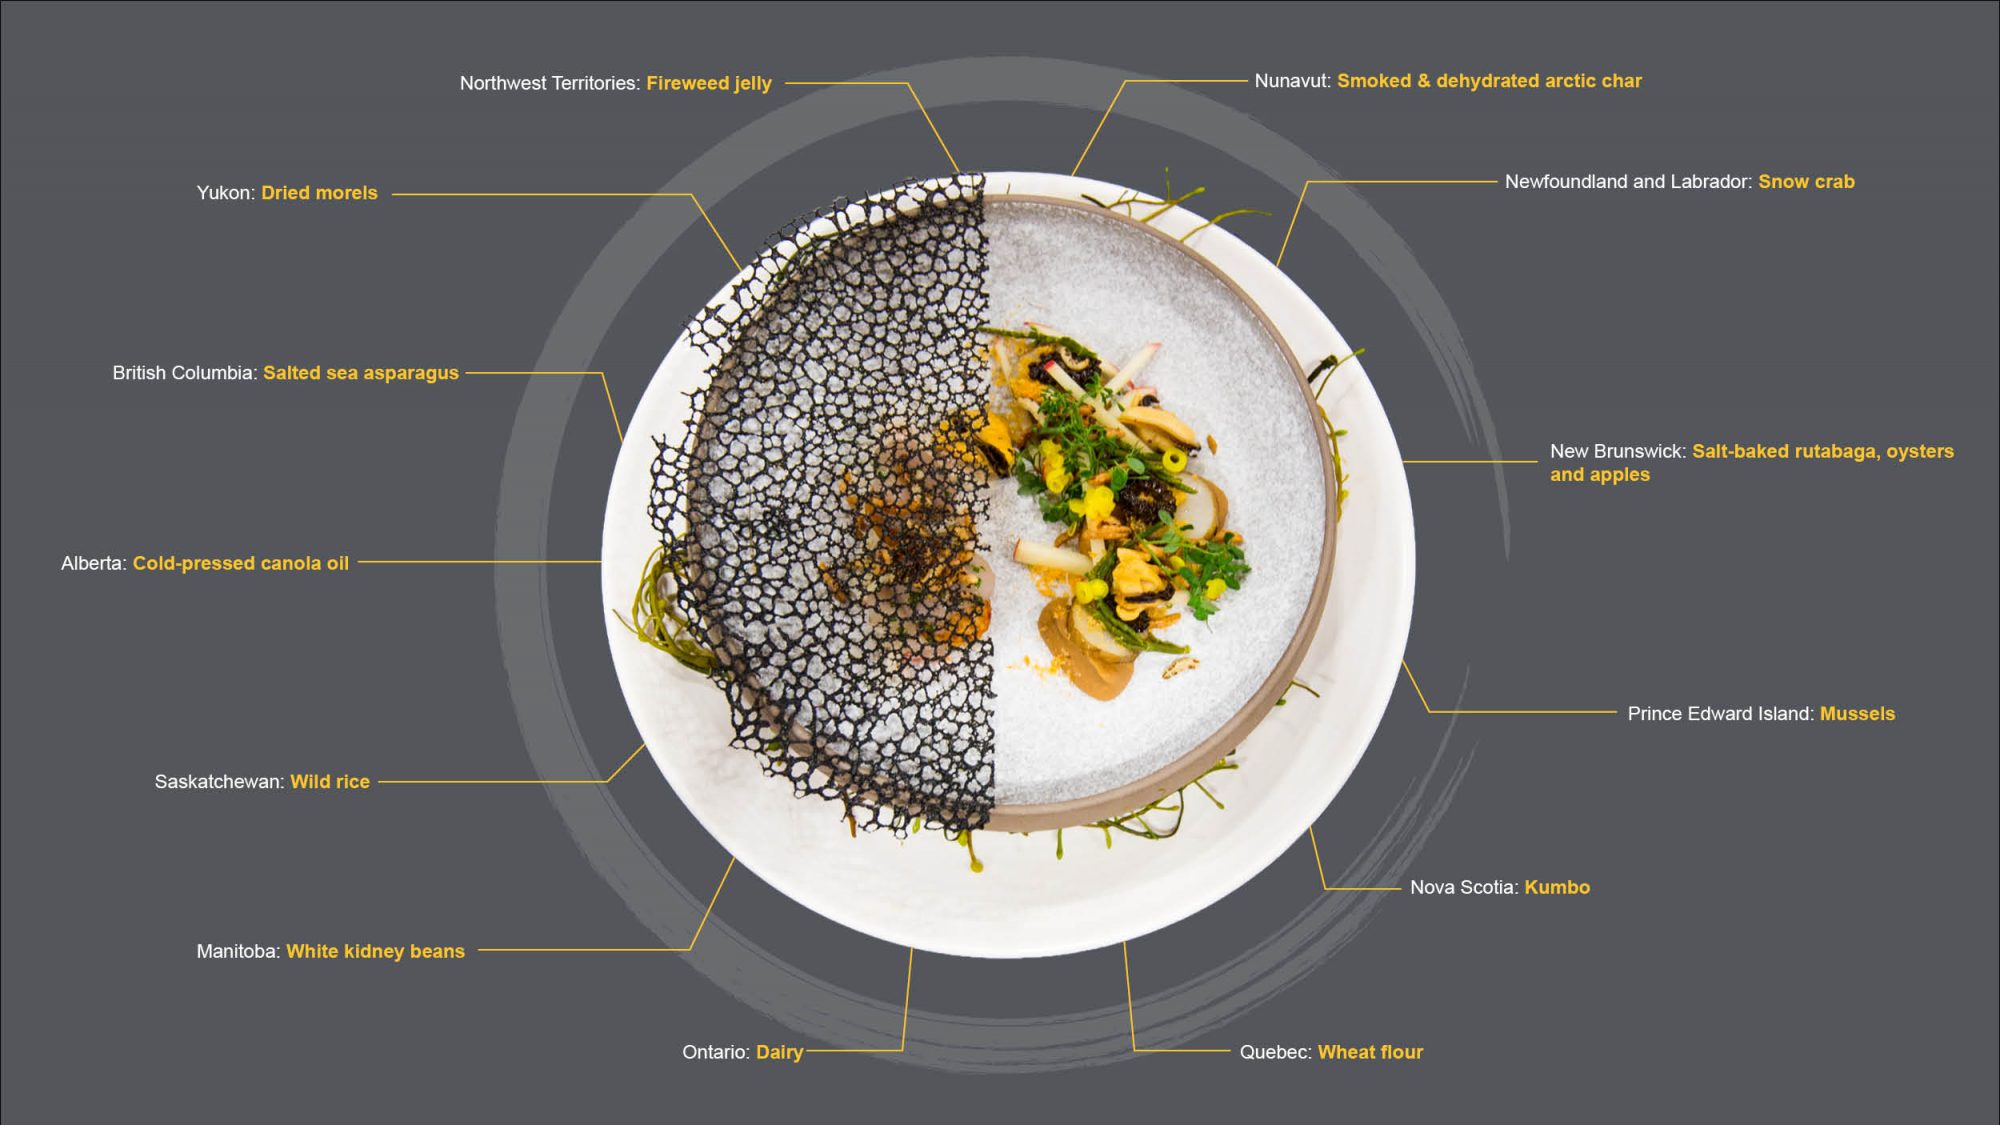 A diagram including an image Chef Pierre's plate, with text references to each ingredient and where they are from. Ingredient lists at the bottom of the webpage.